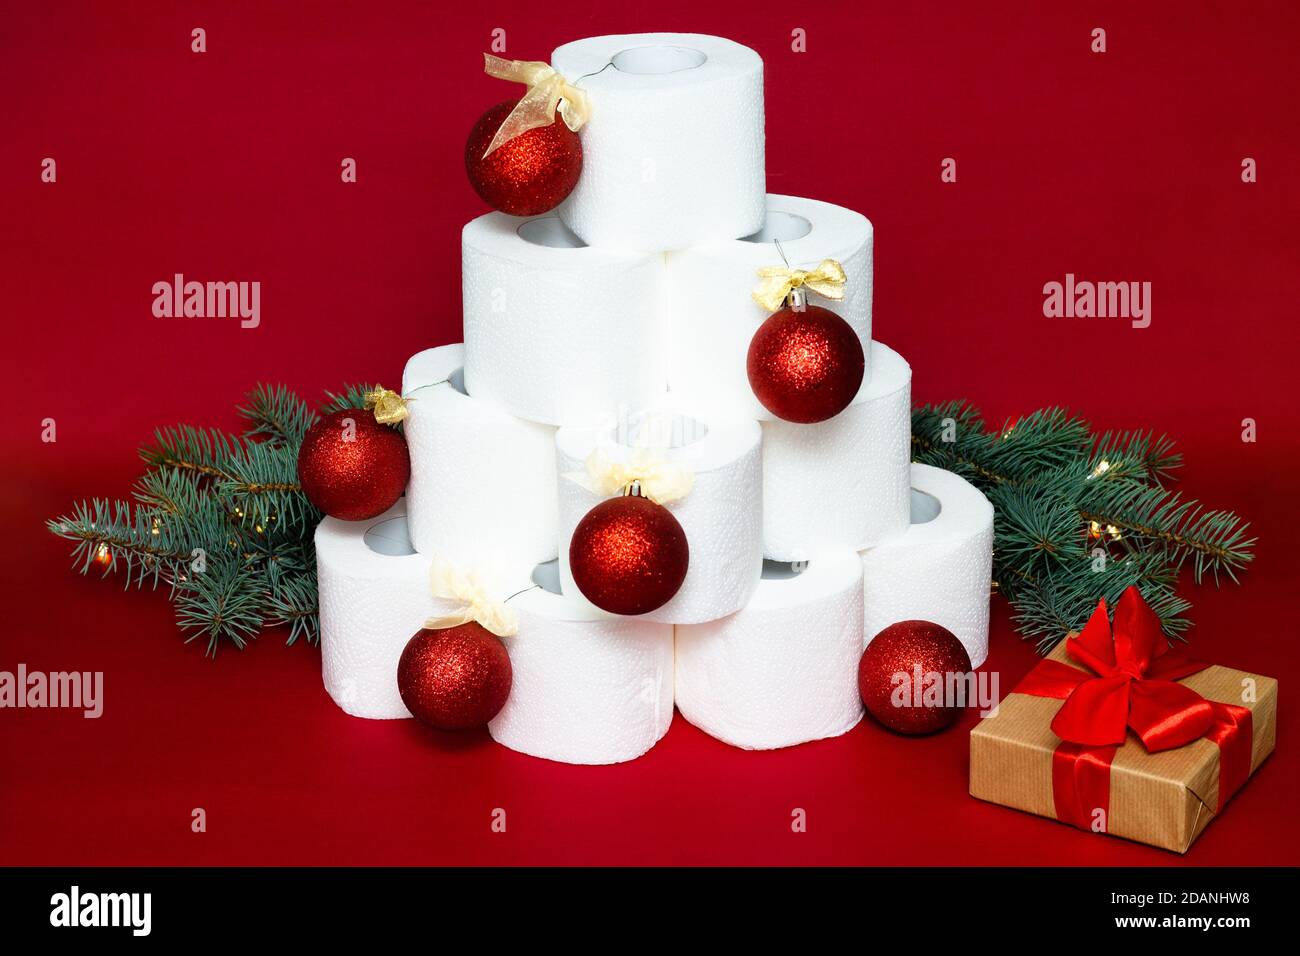 Christmas tree made from rolls of toilet paper, decorated with shiny balls, near a gift and fir branches on a red background Stock Photo